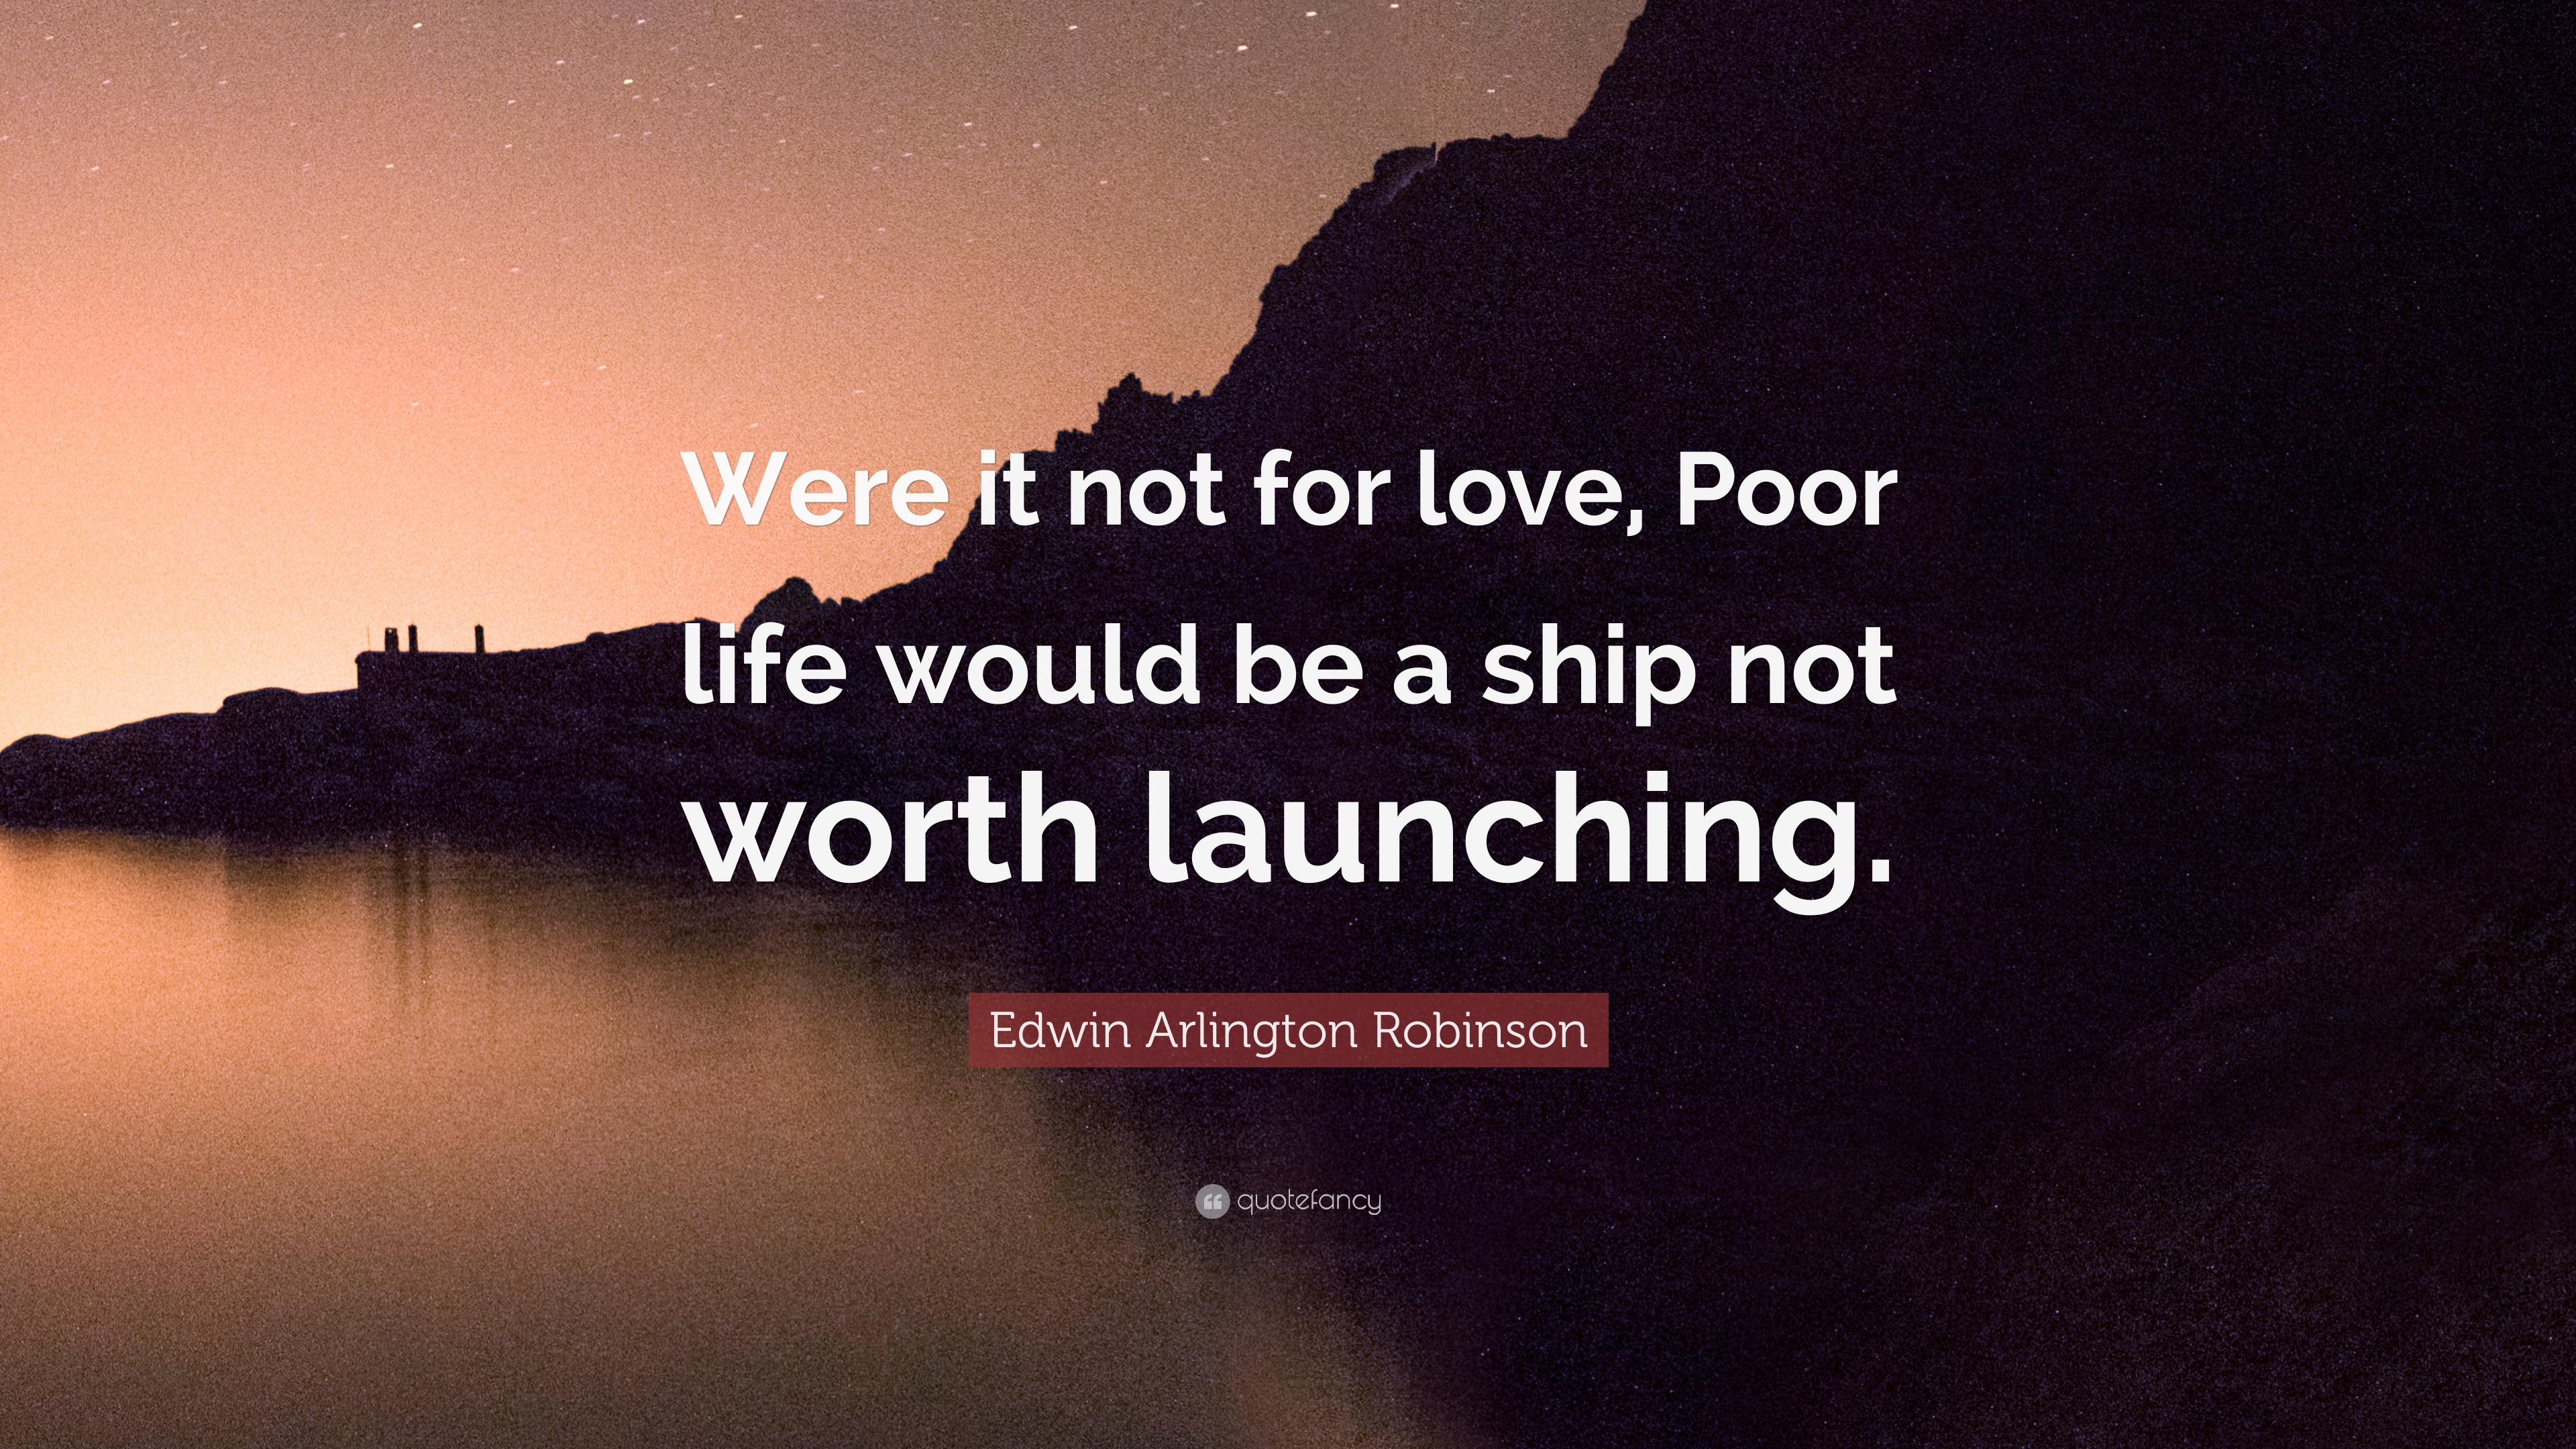 Edwin Arlington Robinson Quote: “Were it not for love, Poor life would ...